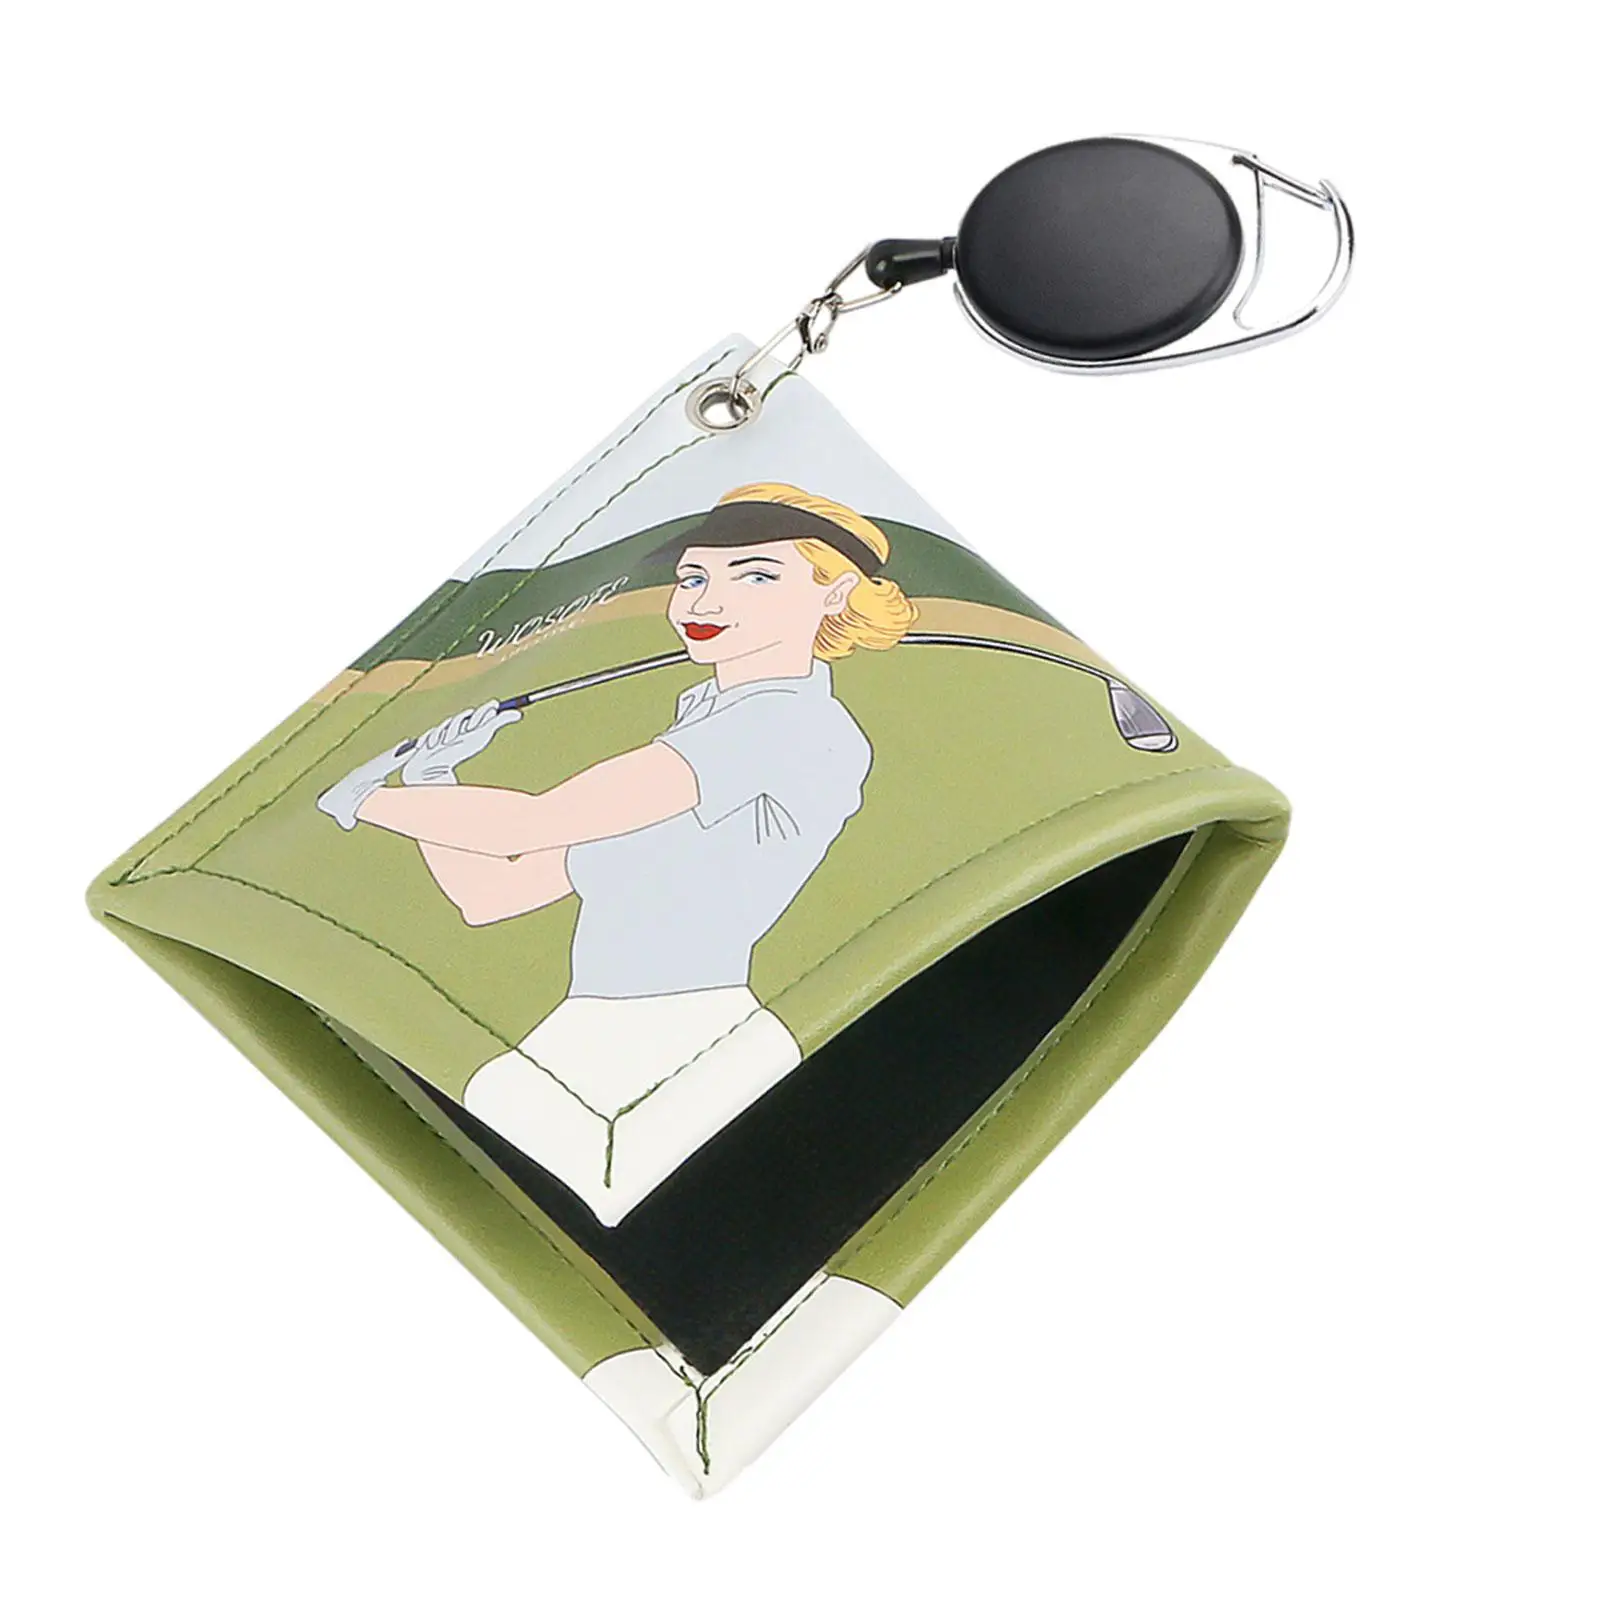 

Golf Ball Towel Golf Club Head Cleaner for Men Women with Retractable Keychain Buckle 12x12cm Golf Ball Cleaner Pocket